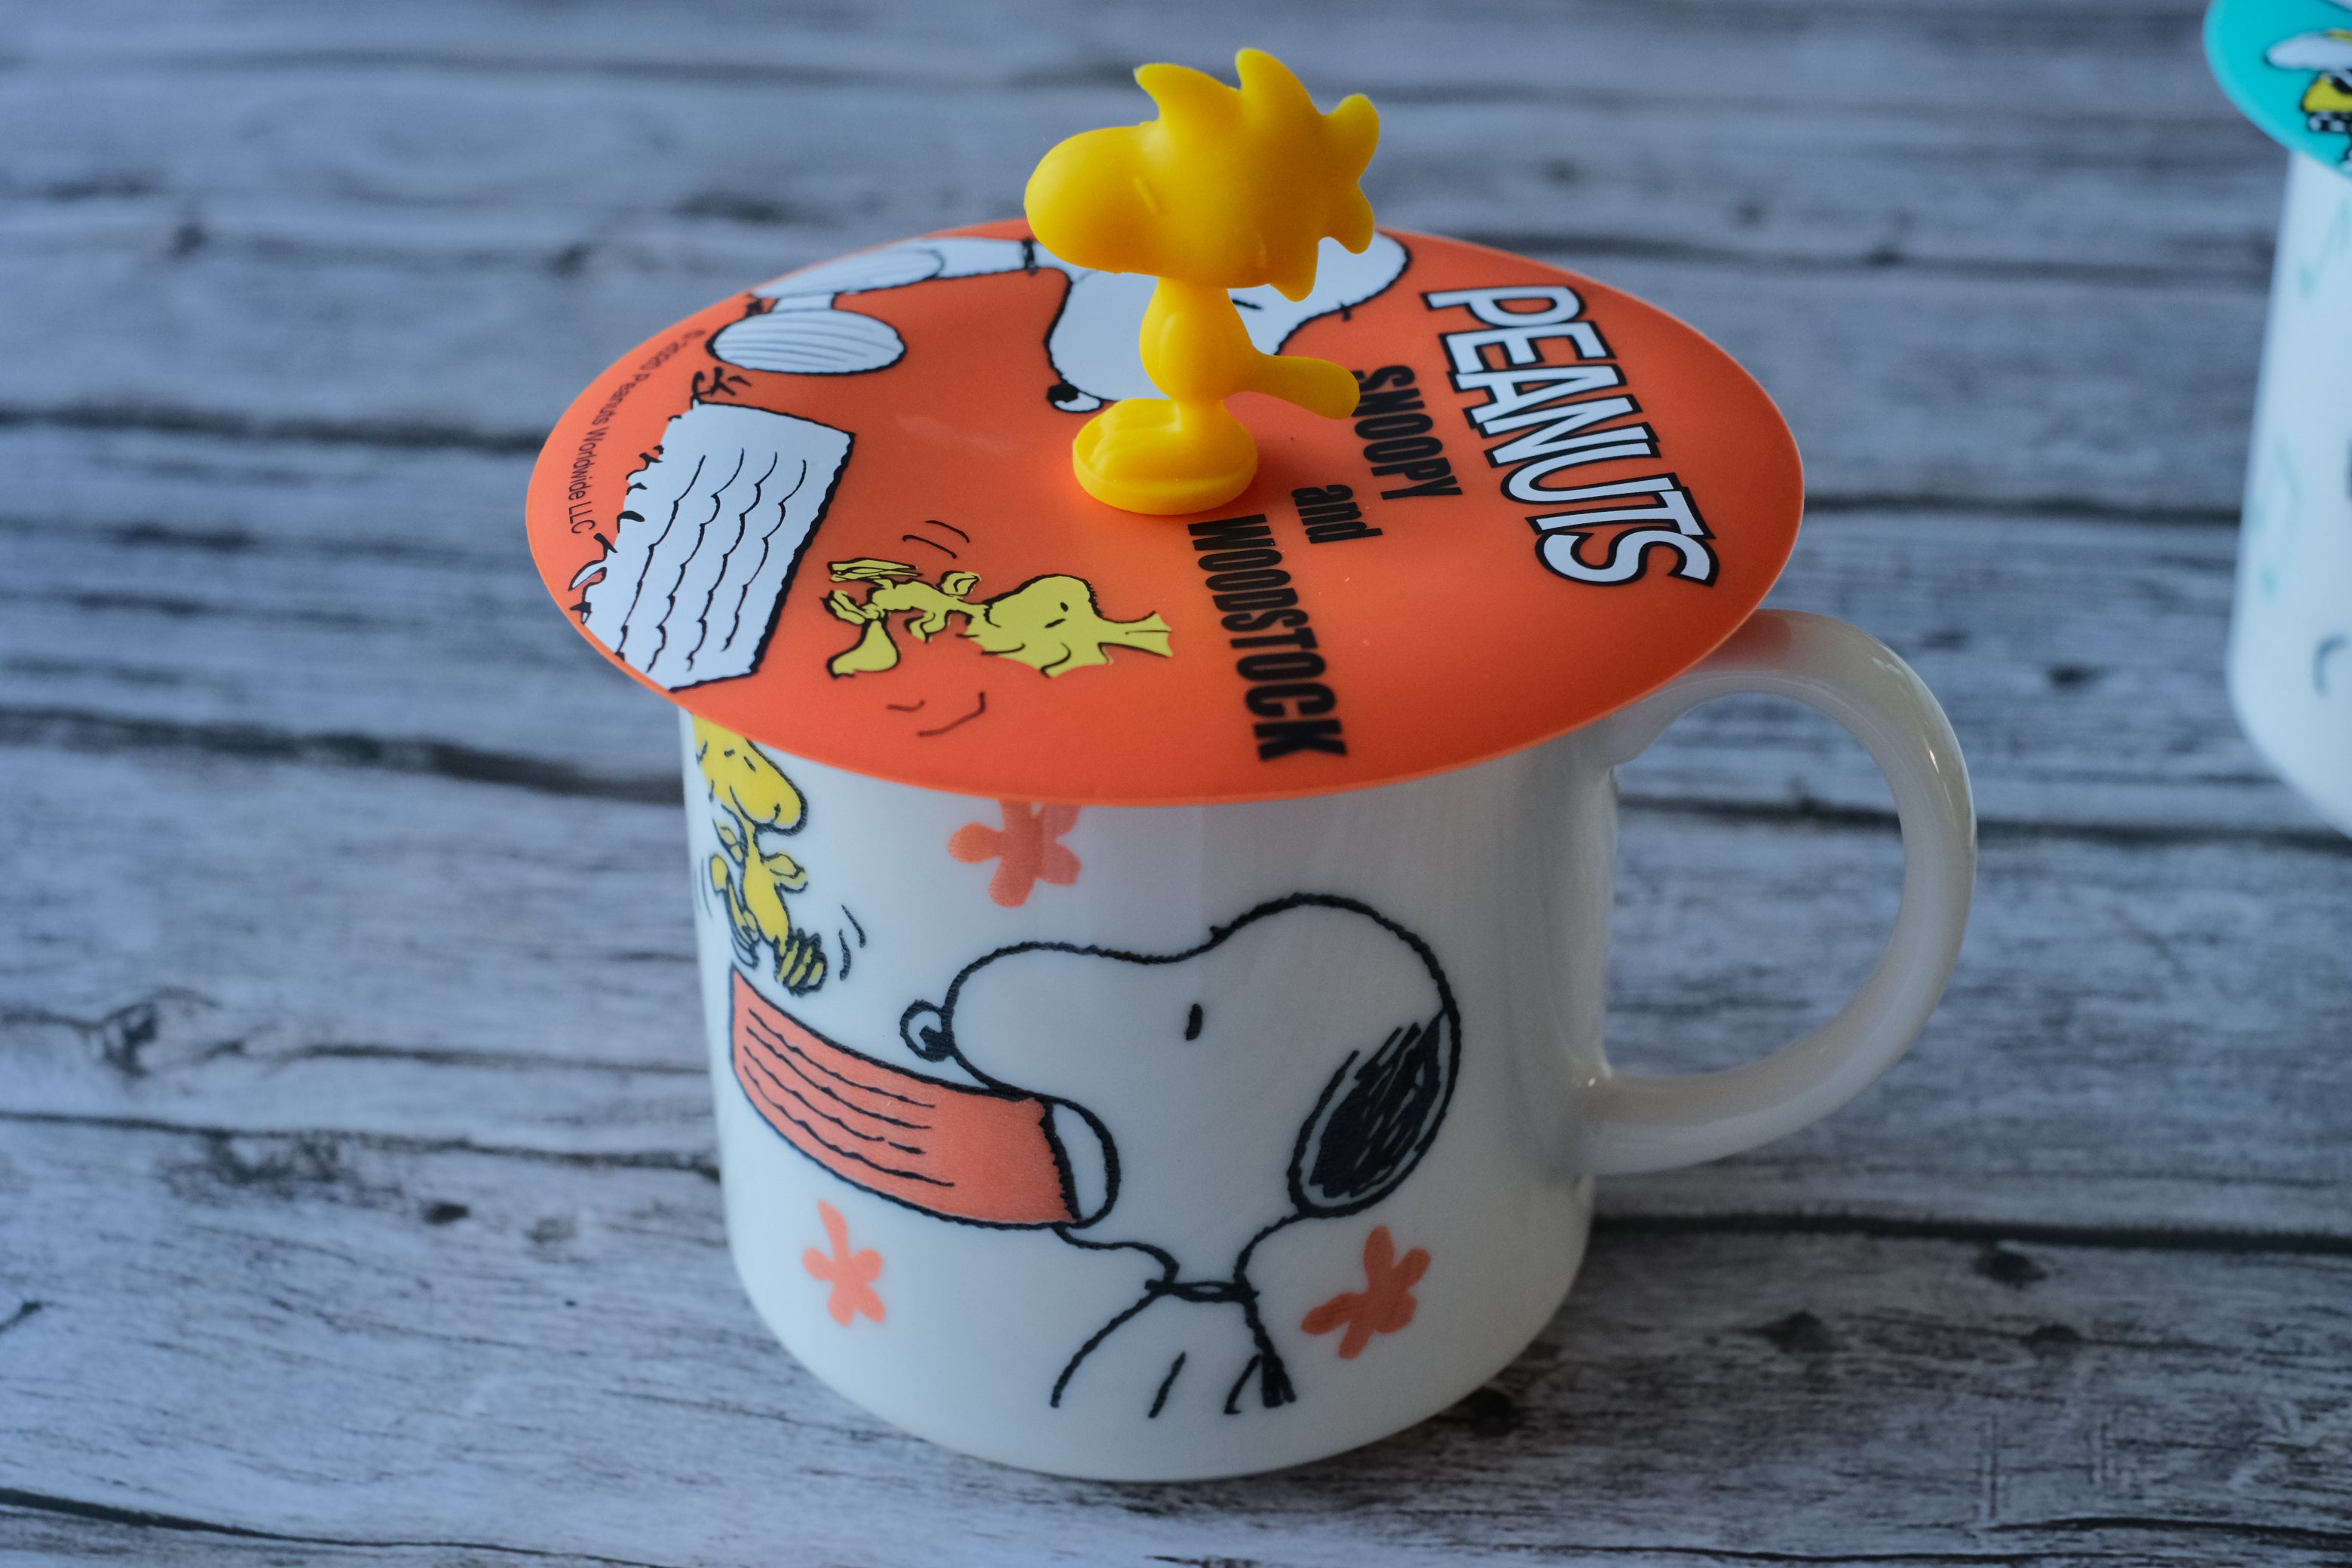 Peanuts Snoopy Japan Mug Cups with 3D Silicon Cup Cover – Object of Living